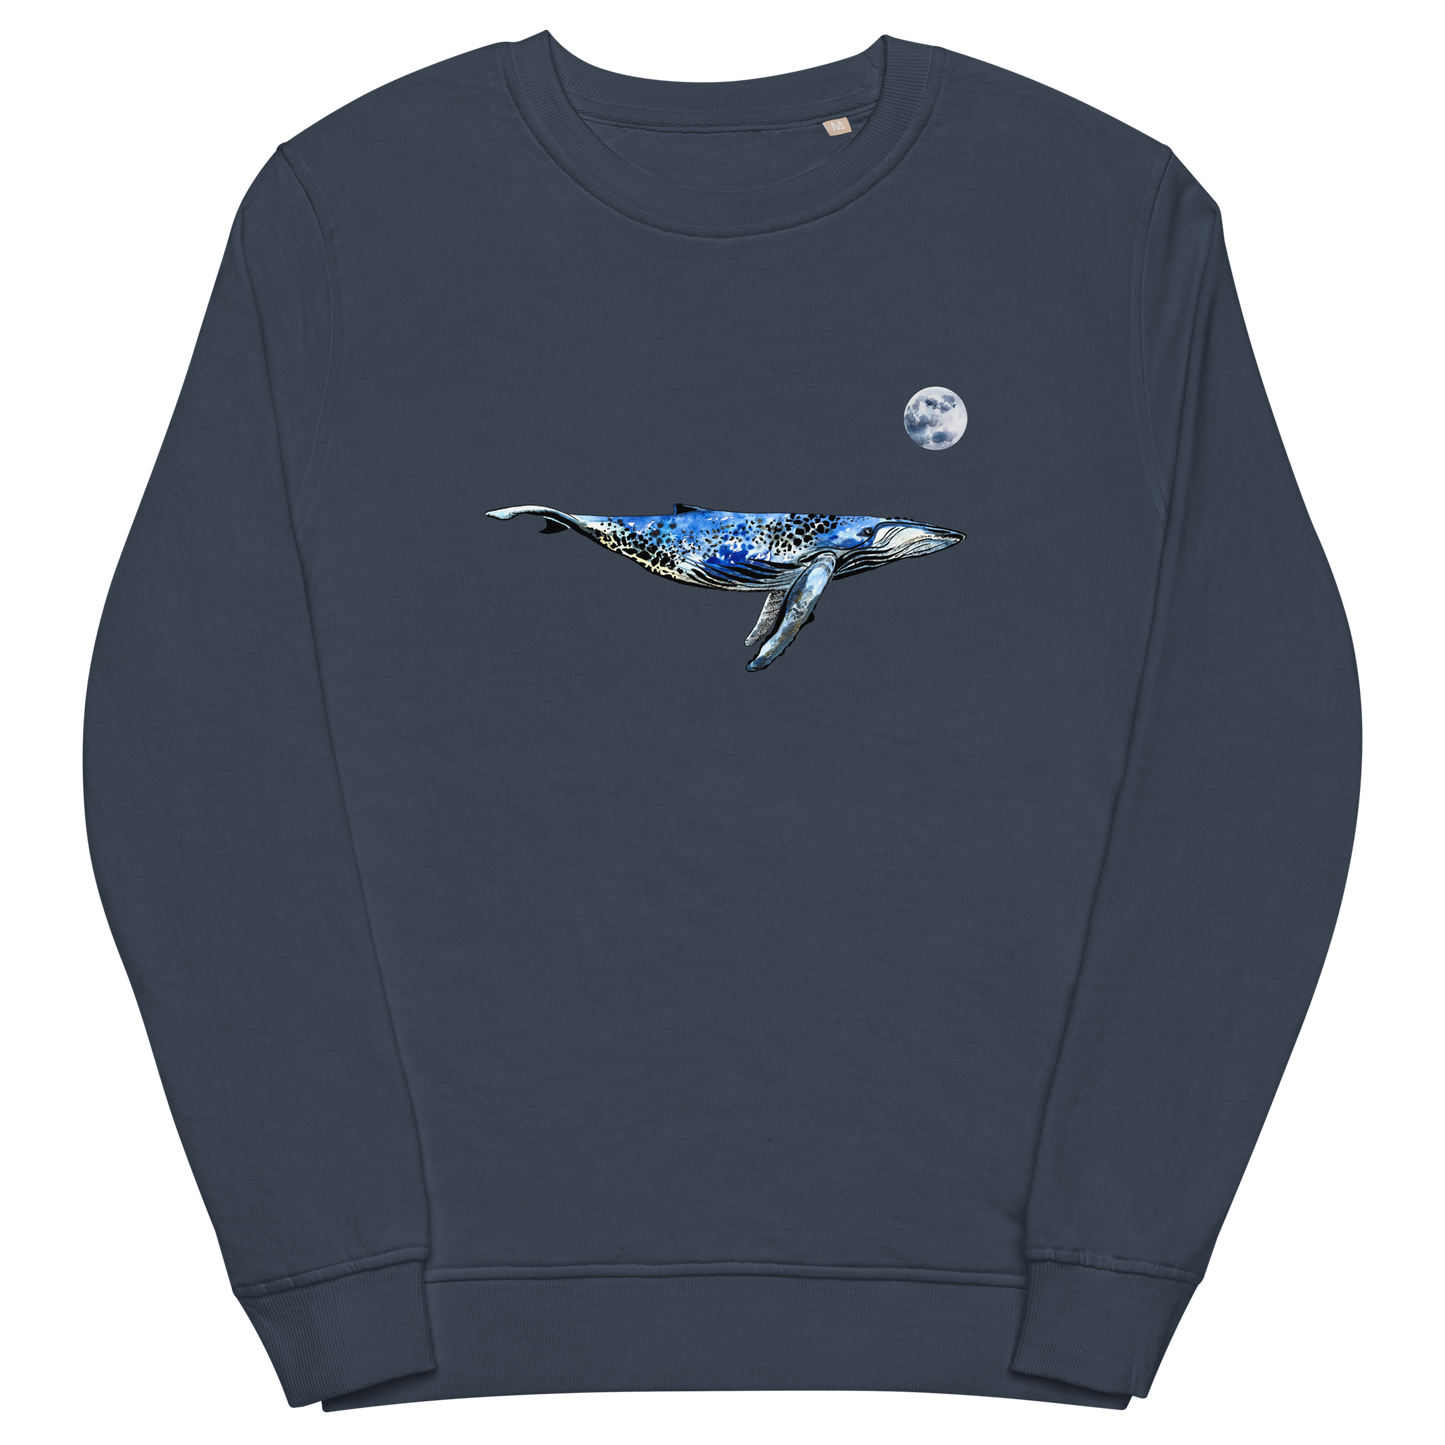 French Navy Organic Cotton Whale Sweatshirt showcasing a captivating Whale Under The Moon graphic on the chest - Cool Whale Graphic Sweatshirts - Boozy Fox